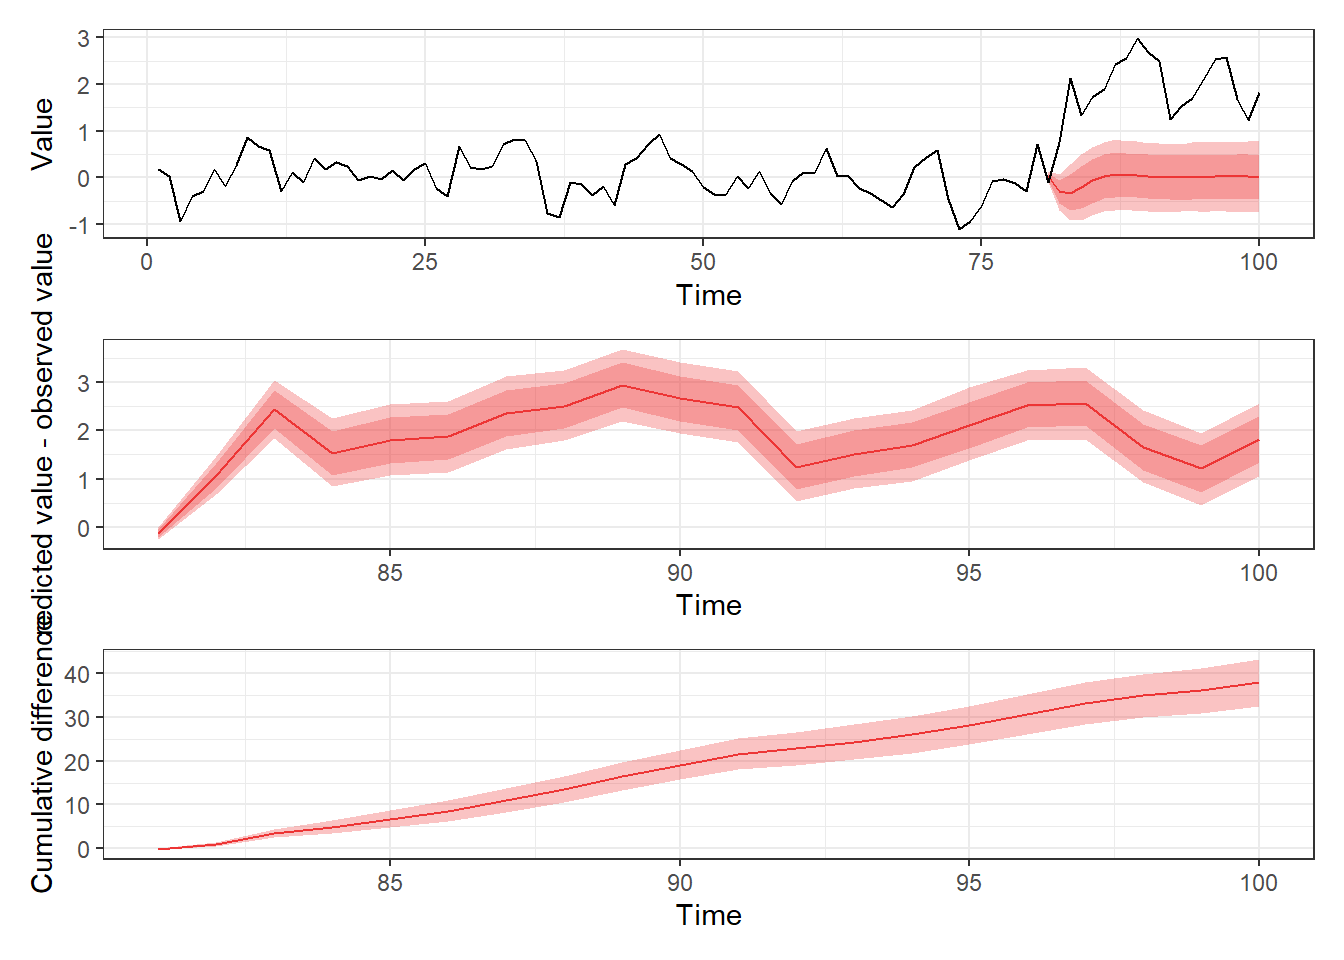 Three stacked line plots, each with time as the x axis. From top to bottom, the y-axes are Value, Predicted minus Observed value, and Cumulative differences. The top figure shows a pink ribbon deviating from a black line in the 80-100 time range. The middle figure shows a fluctuating pink ribbon. The bottom figure shows an increasing ribbon.